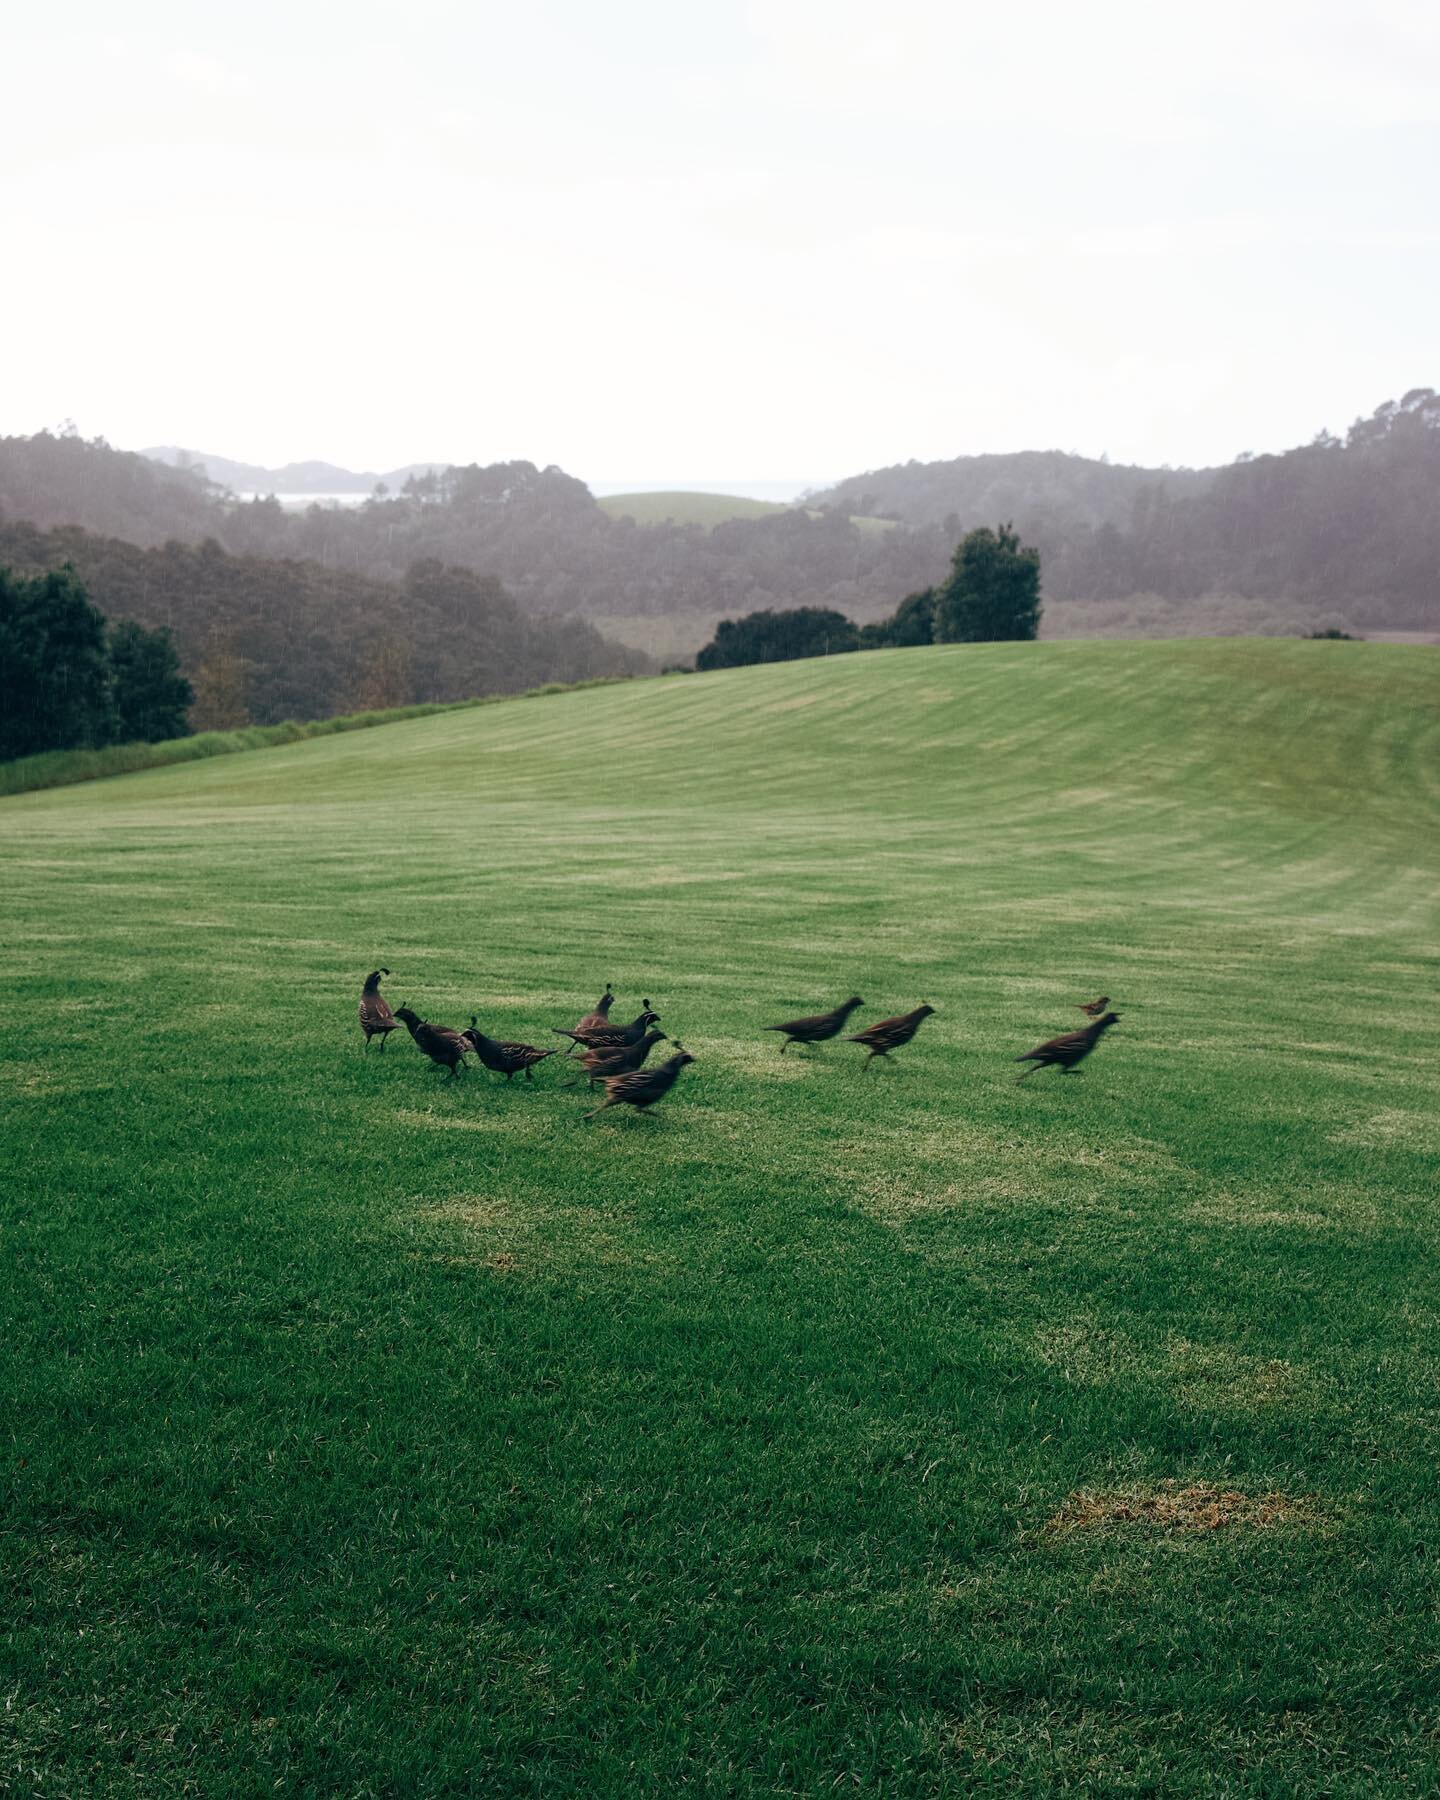 Rush hour at Riverlands&hellip; 
The California Quails &lsquo;Tikaokao&rsquo; are locals in Ngunguru and we have a few families of them at Riverlands. You&rsquo;ll usually find them on the lawn, dashing about the property or enjoying a dust bath on t